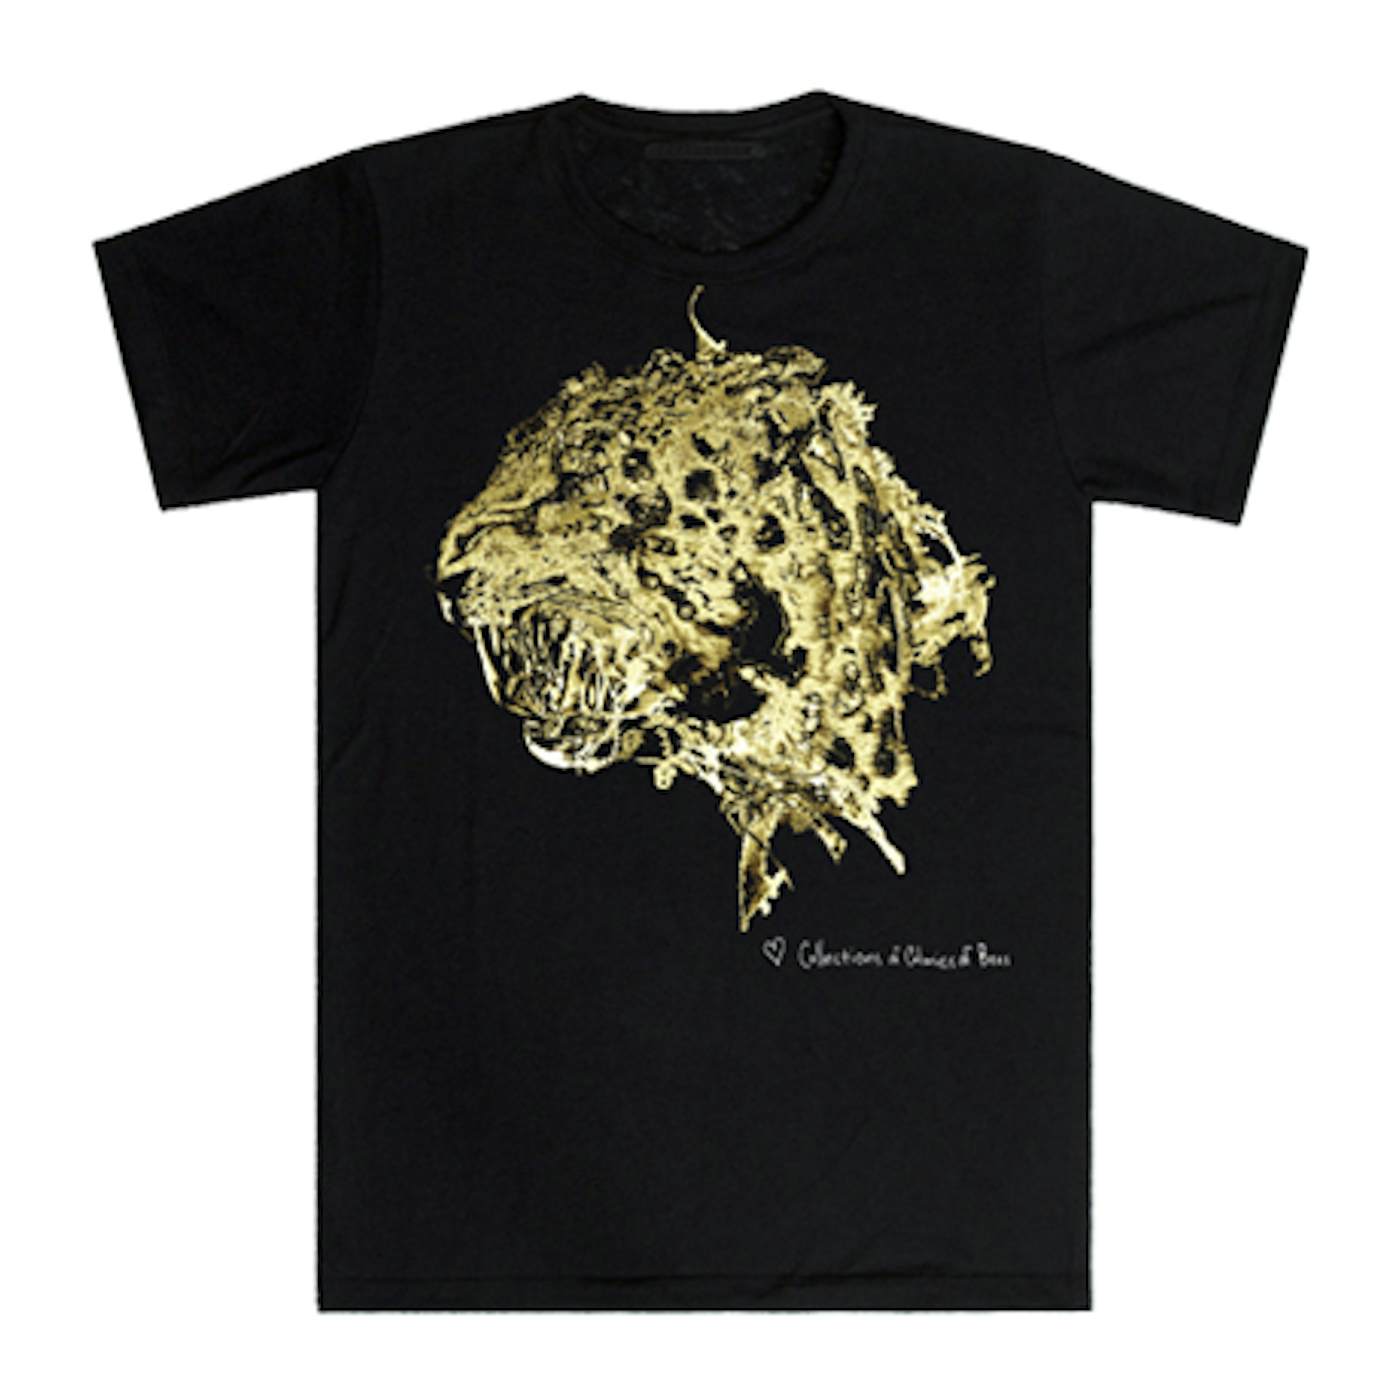 Collections Of Colonies Of Bees Golden Cat T-Shirt